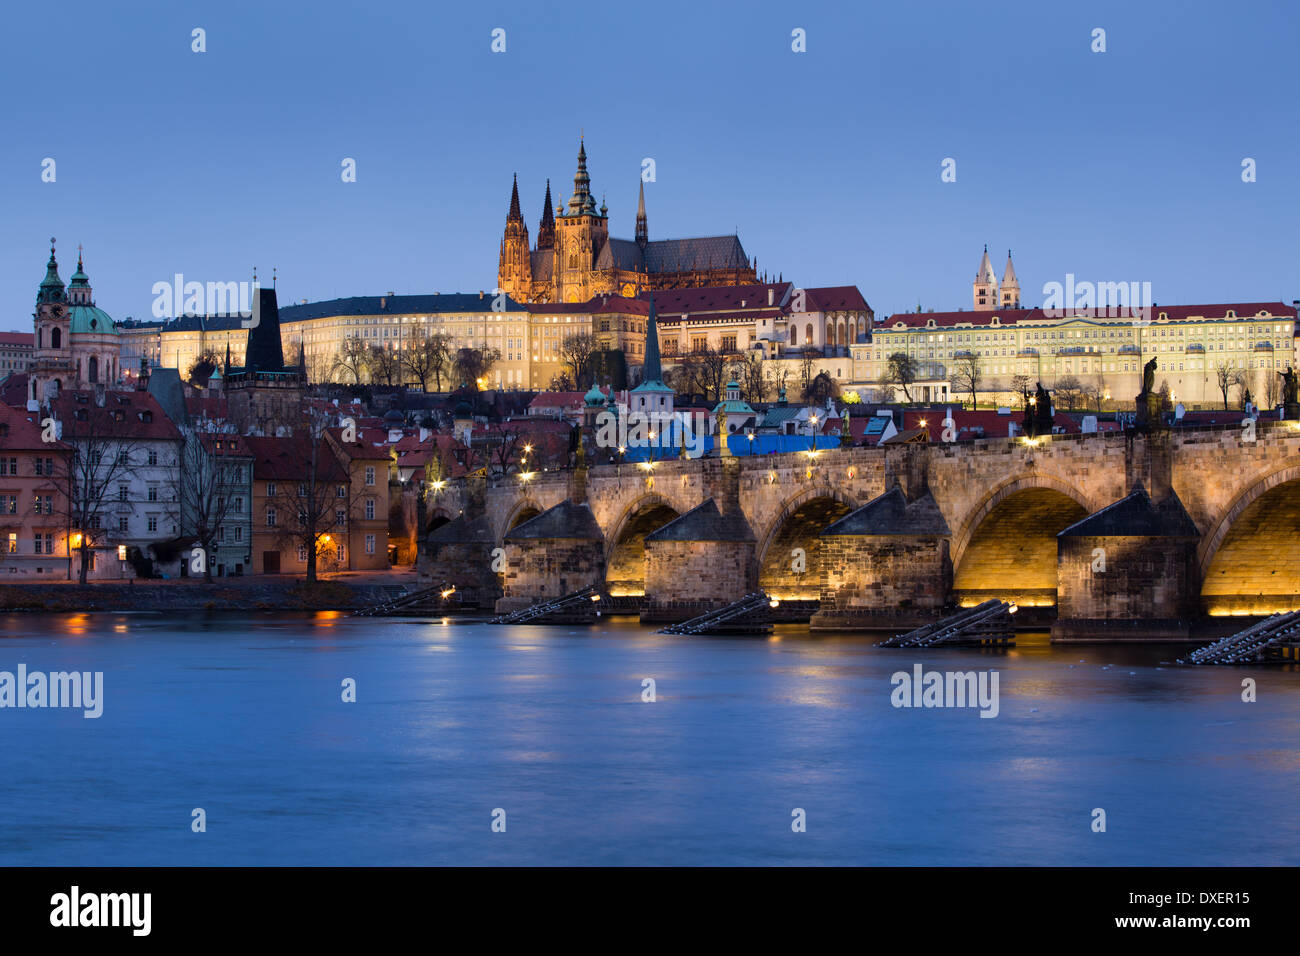 the Castle District, St Vitus Cathedral and the Charles Bridge over the River Vltava at dusk, Prague, Czech Republic Stock Photo